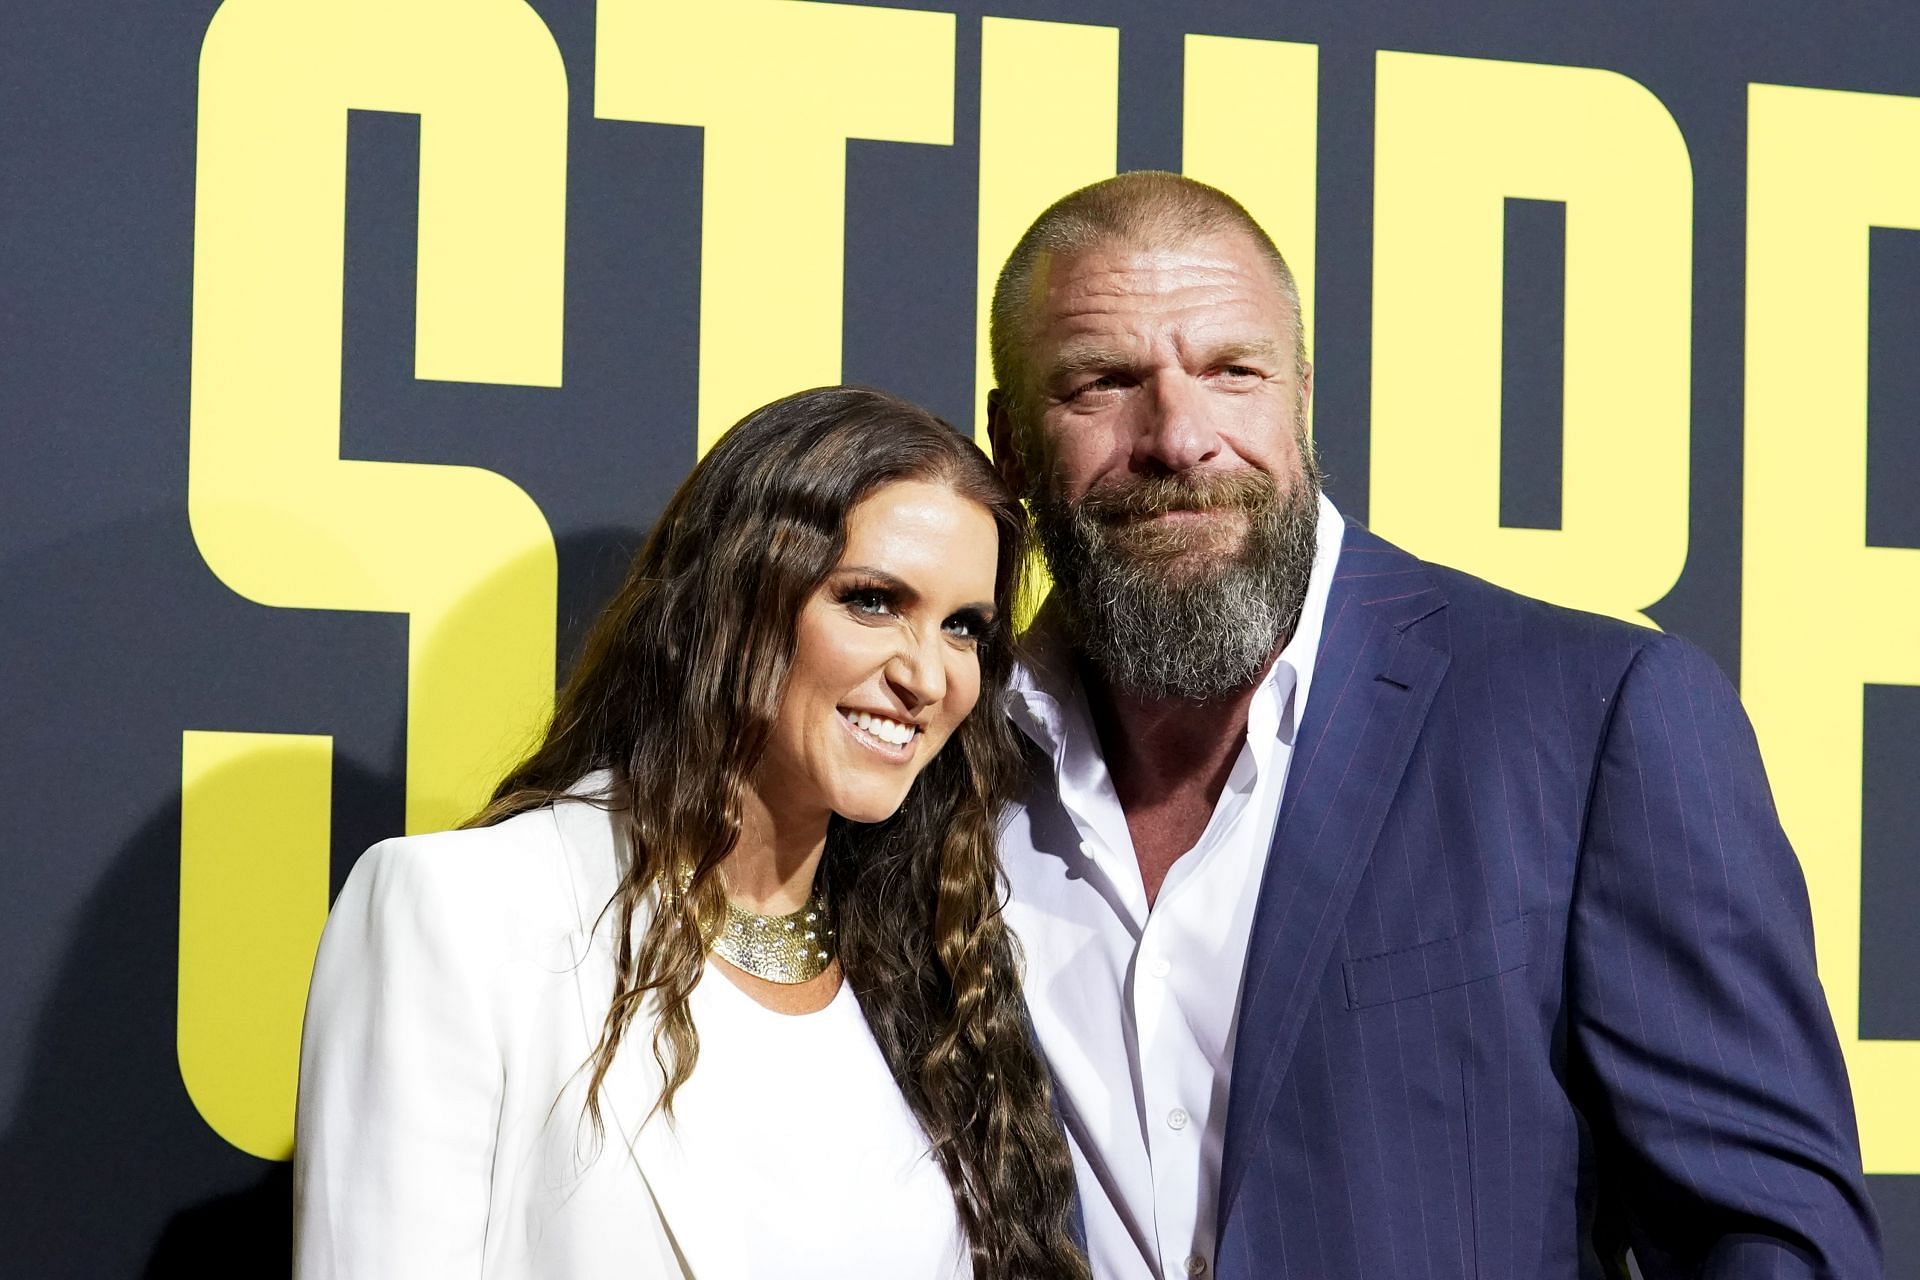 Stephanie McMahon and Triple H have been married for 18 years